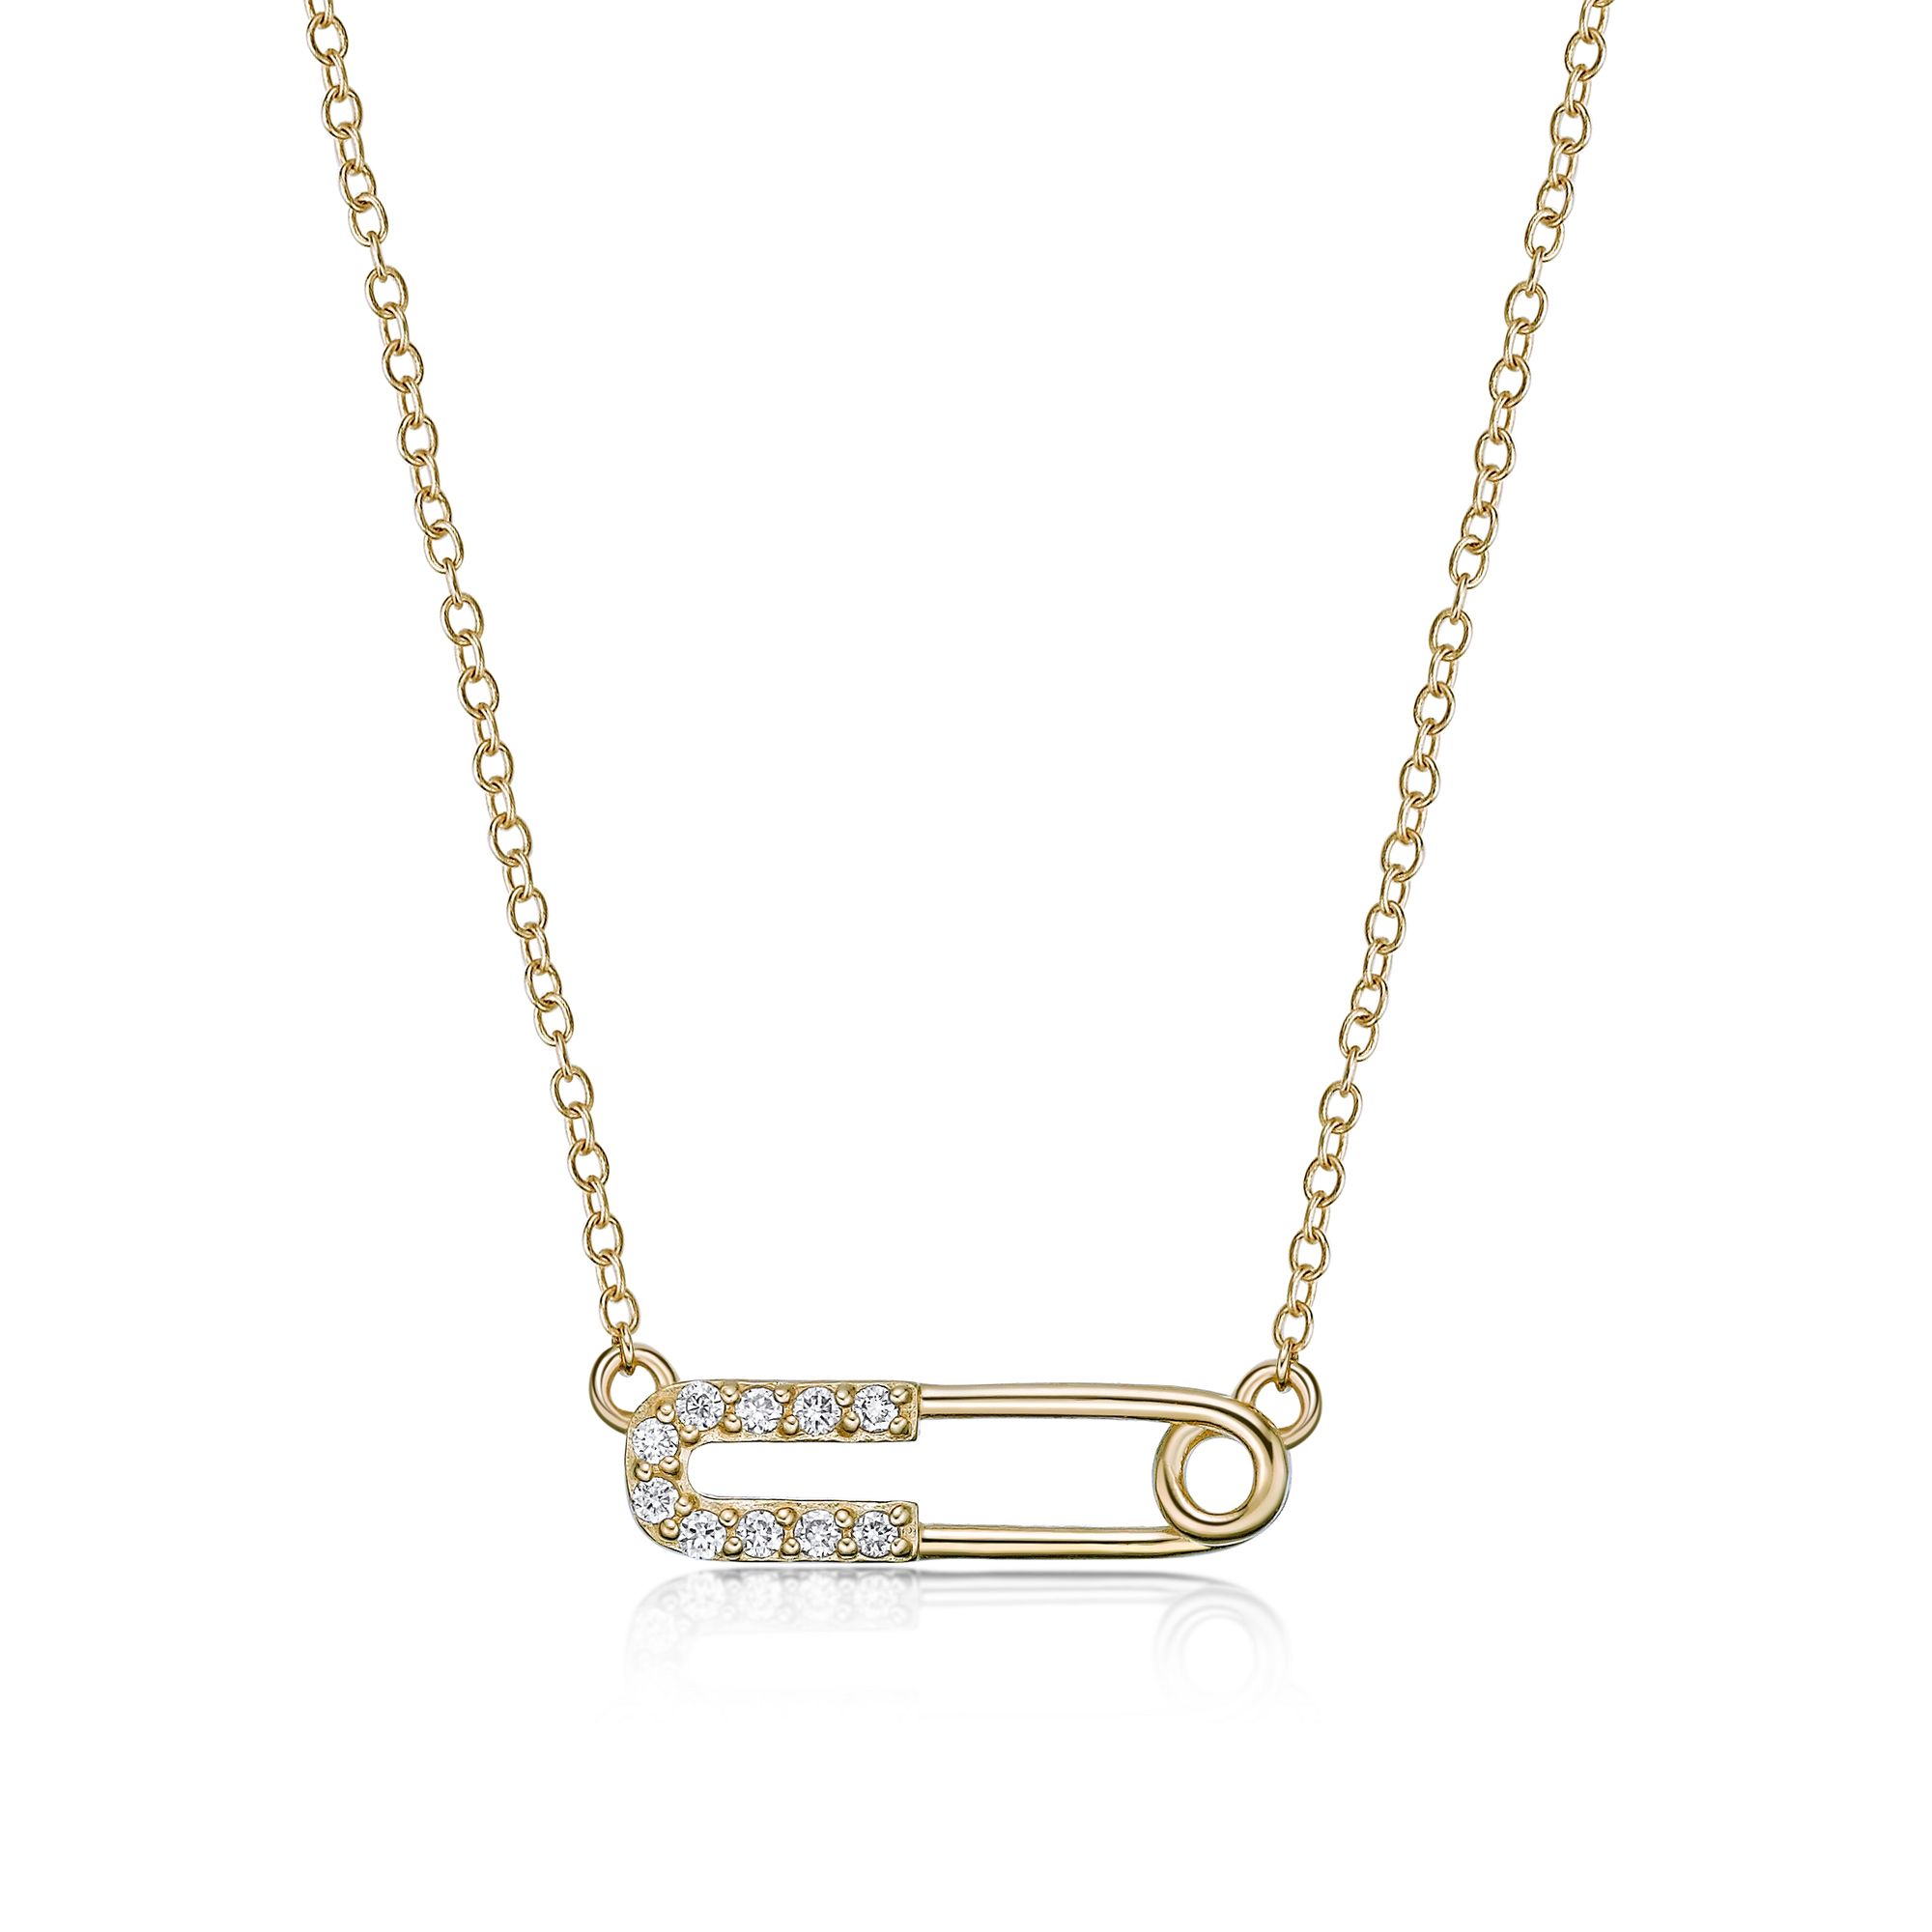 Women's Lab Grown Diamond Paperclip Pendant Necklace in 18K Yellow Gold-Plated Sterling Silver with Lobster Clasp, 0.09 Carat, 18" Cable Chain | Lavari Jewelers